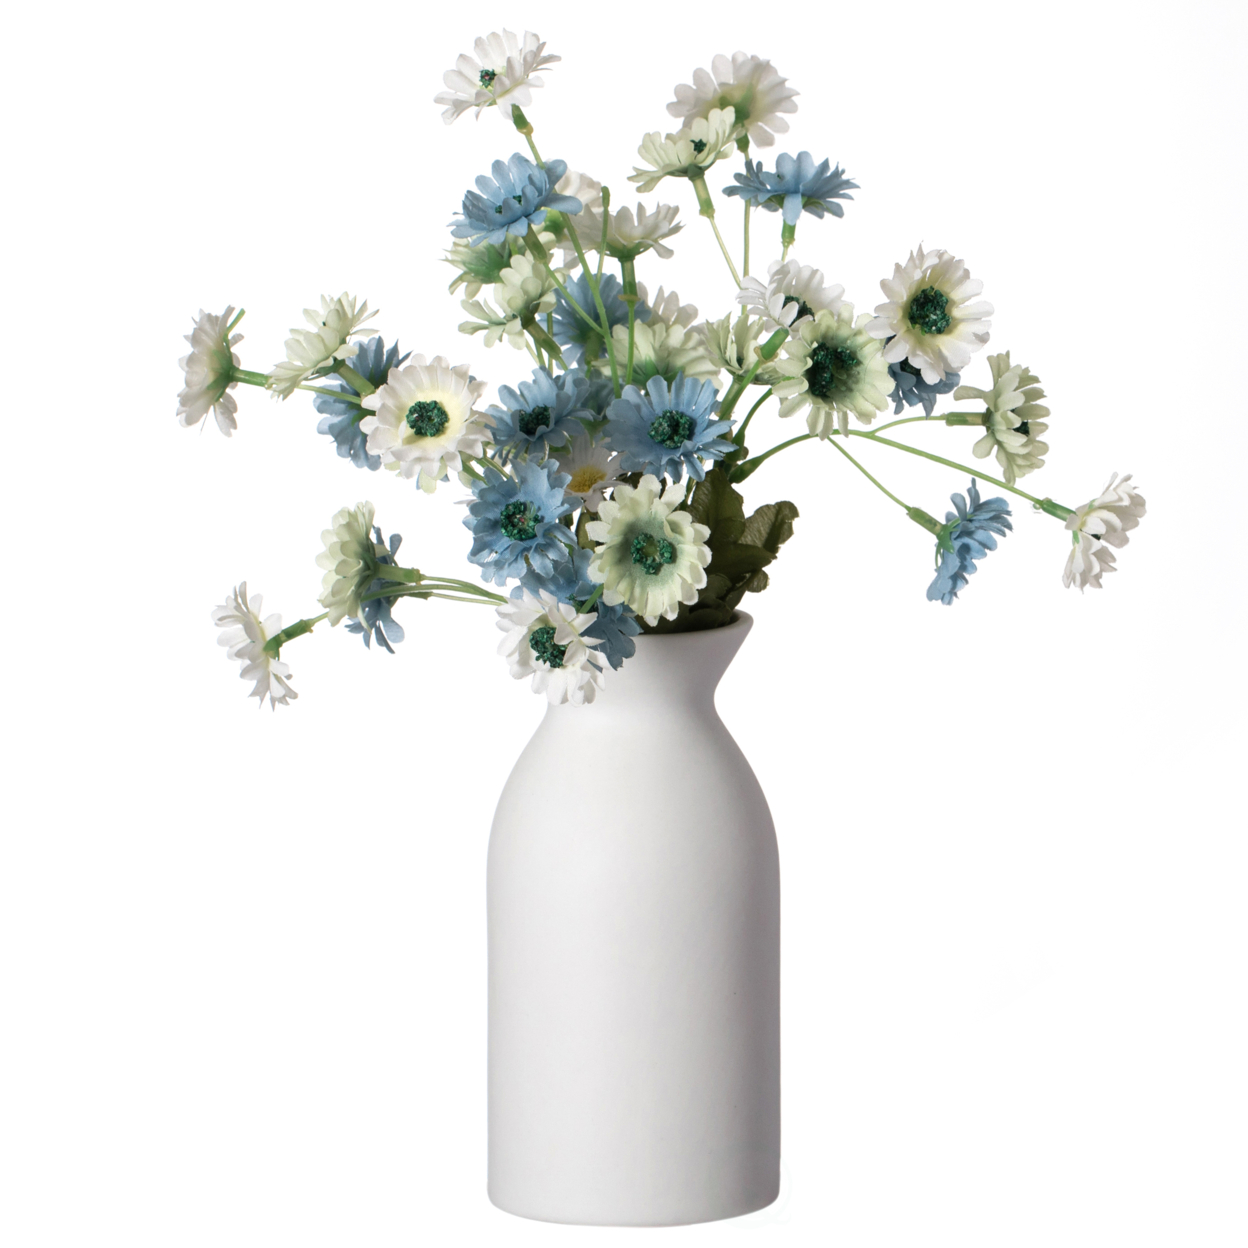 Contemporary White Cylinder Shaped Ceramic Table Flower Vase Holder - Small